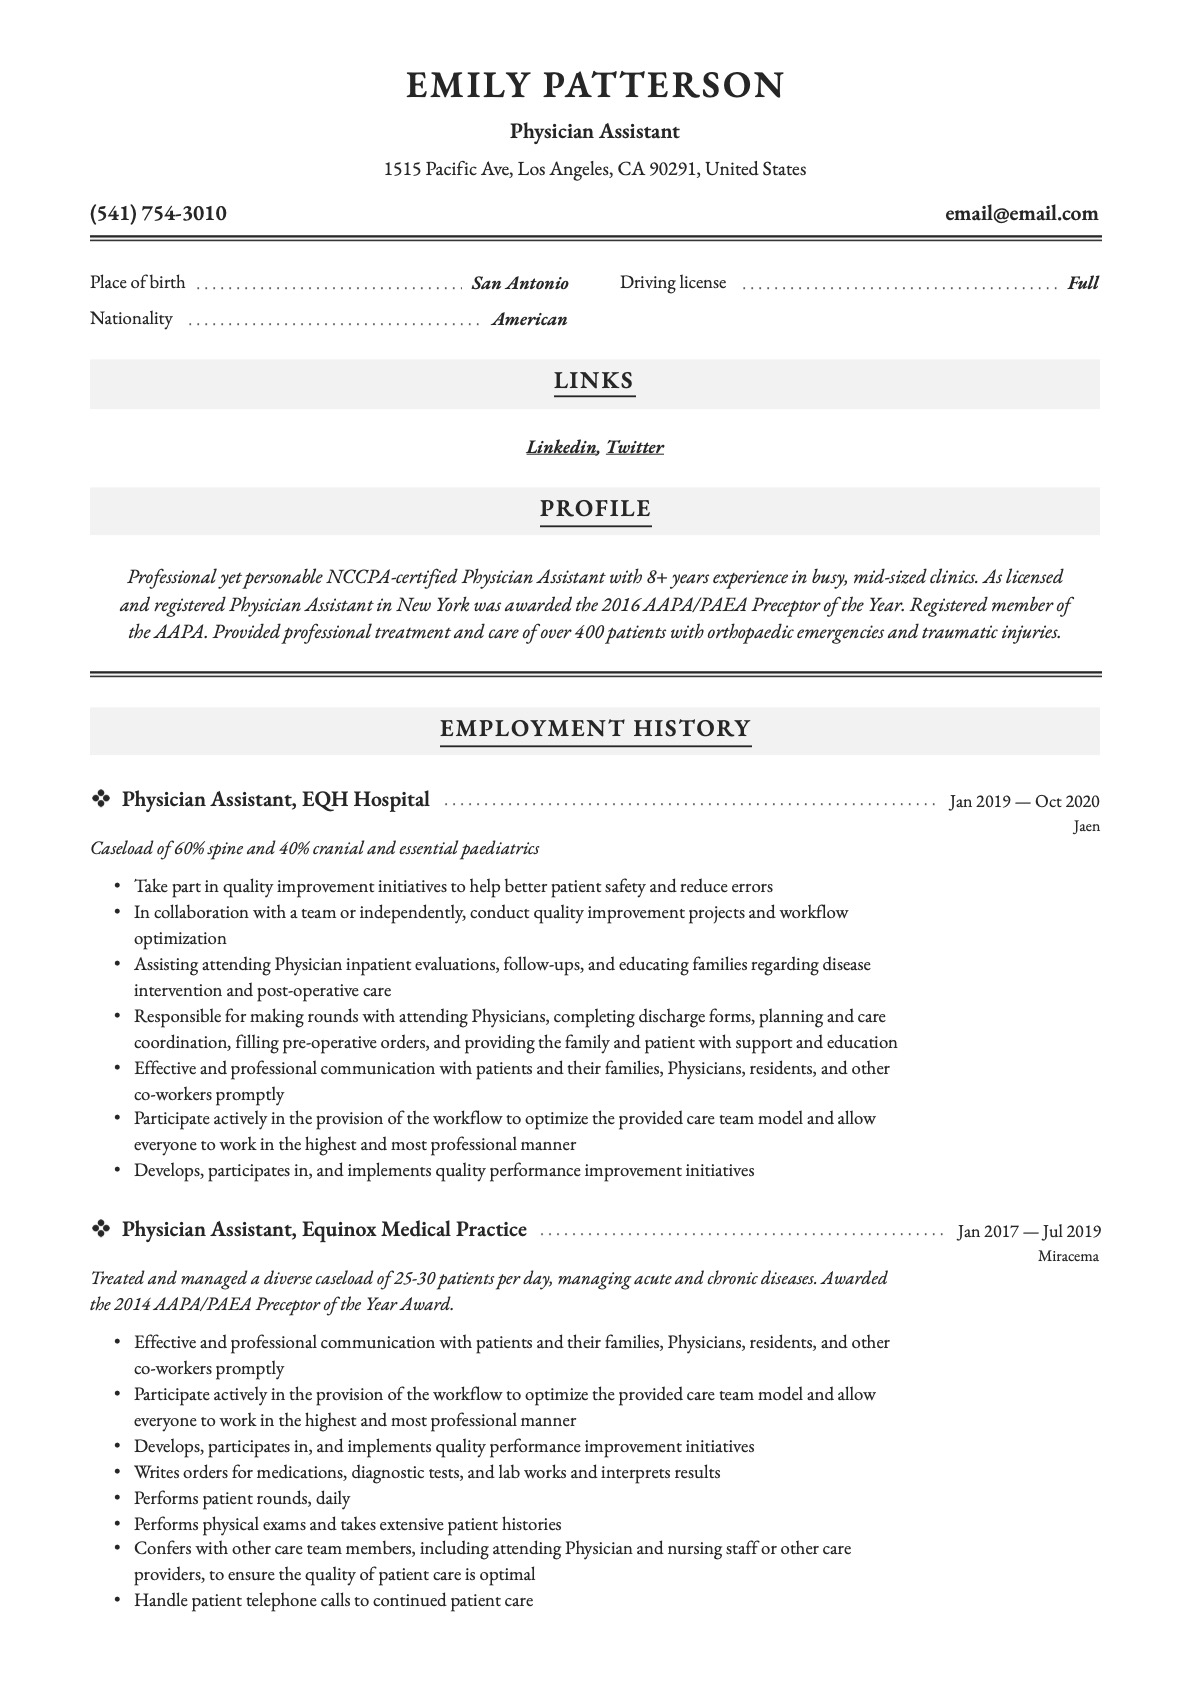 Example Resume Physician Assistant-10